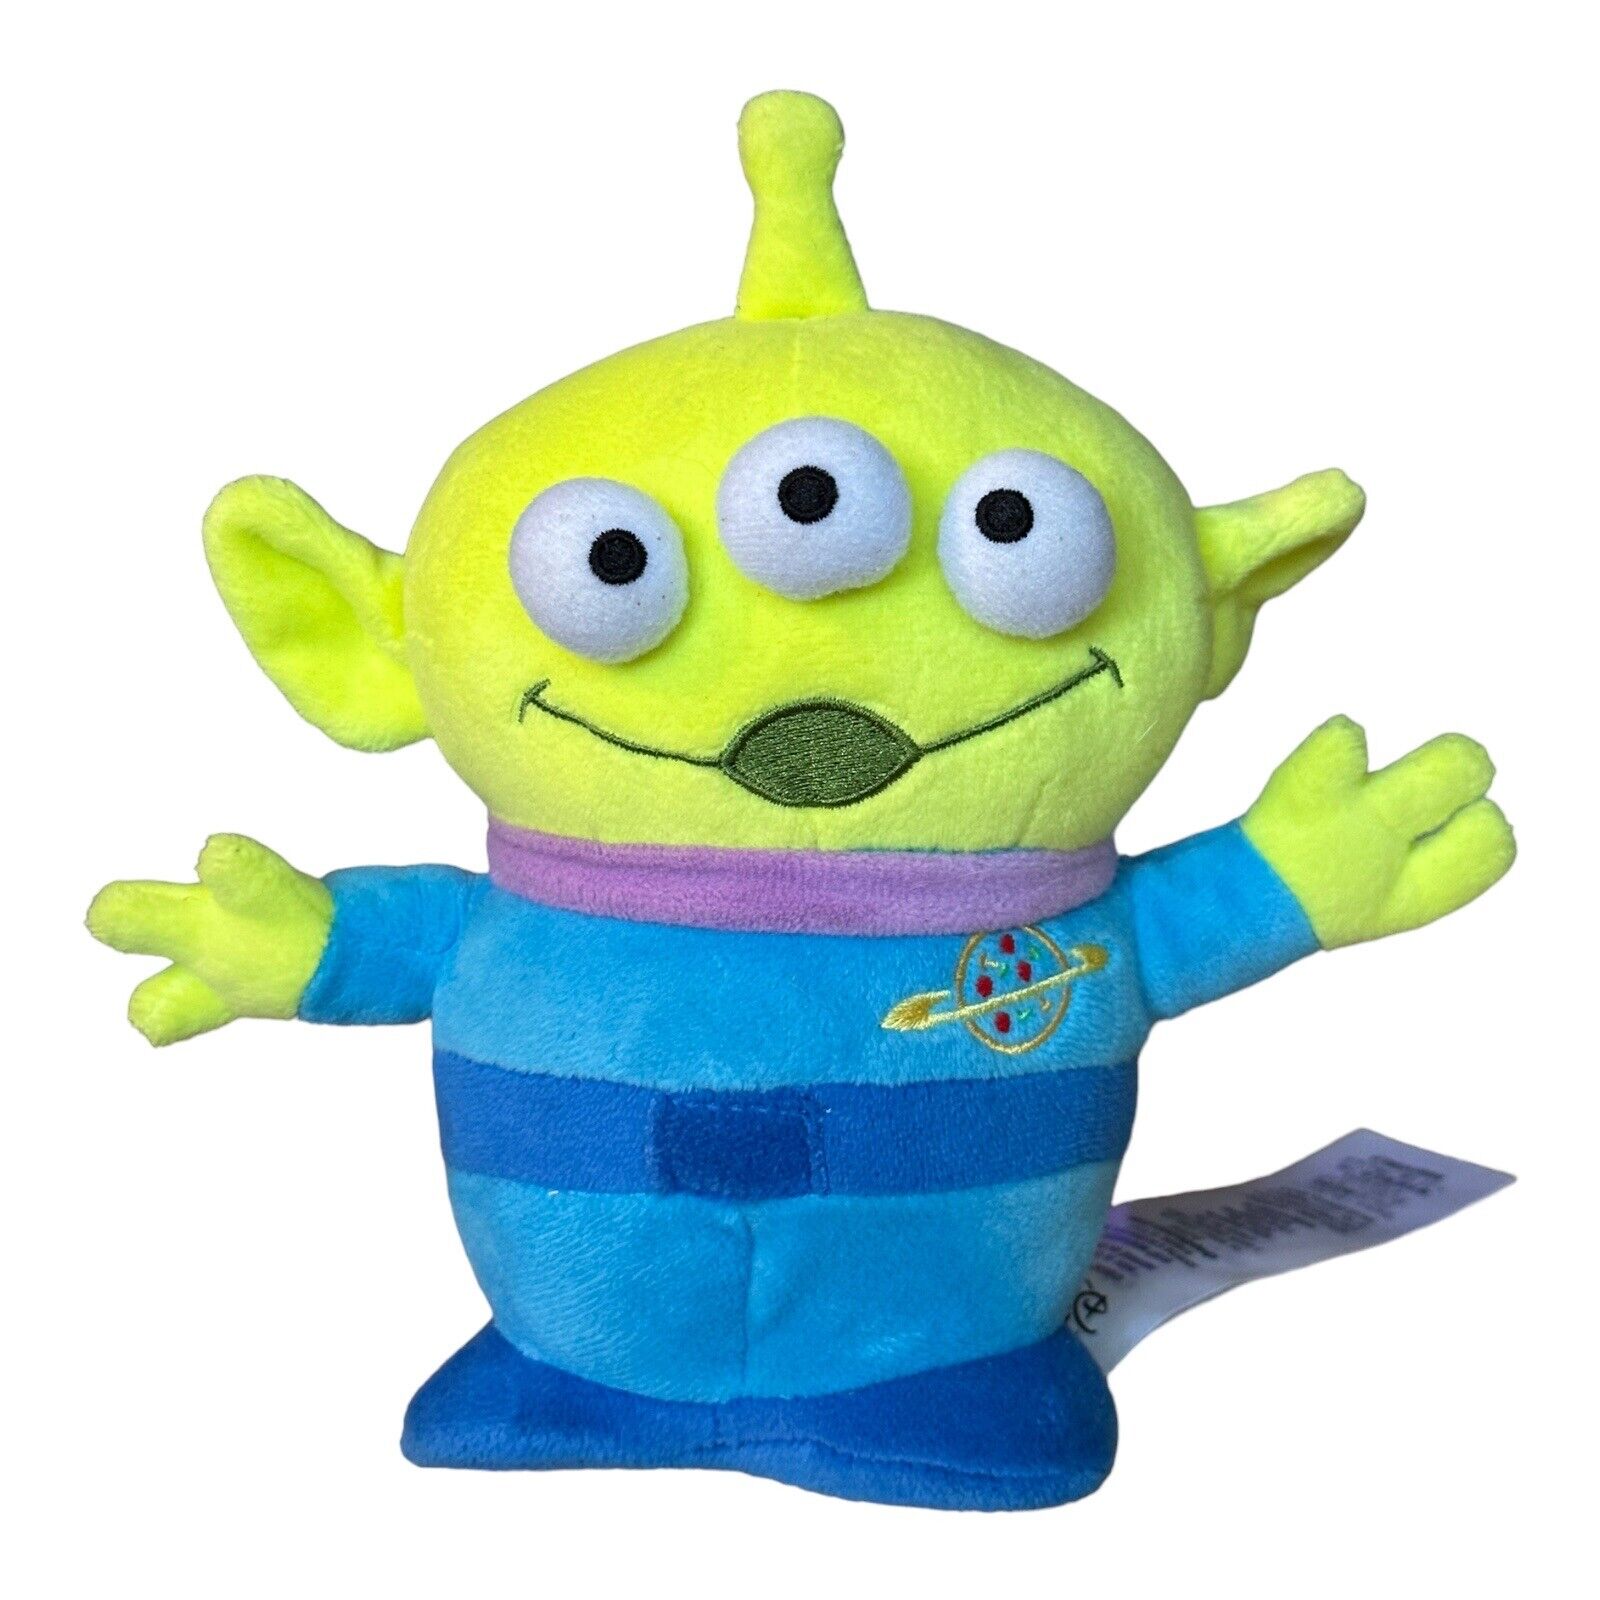 Disney Store Pixar Toy Story 4 Space ALIEN PLUSH Approx 6” | Pizza Planet Claw